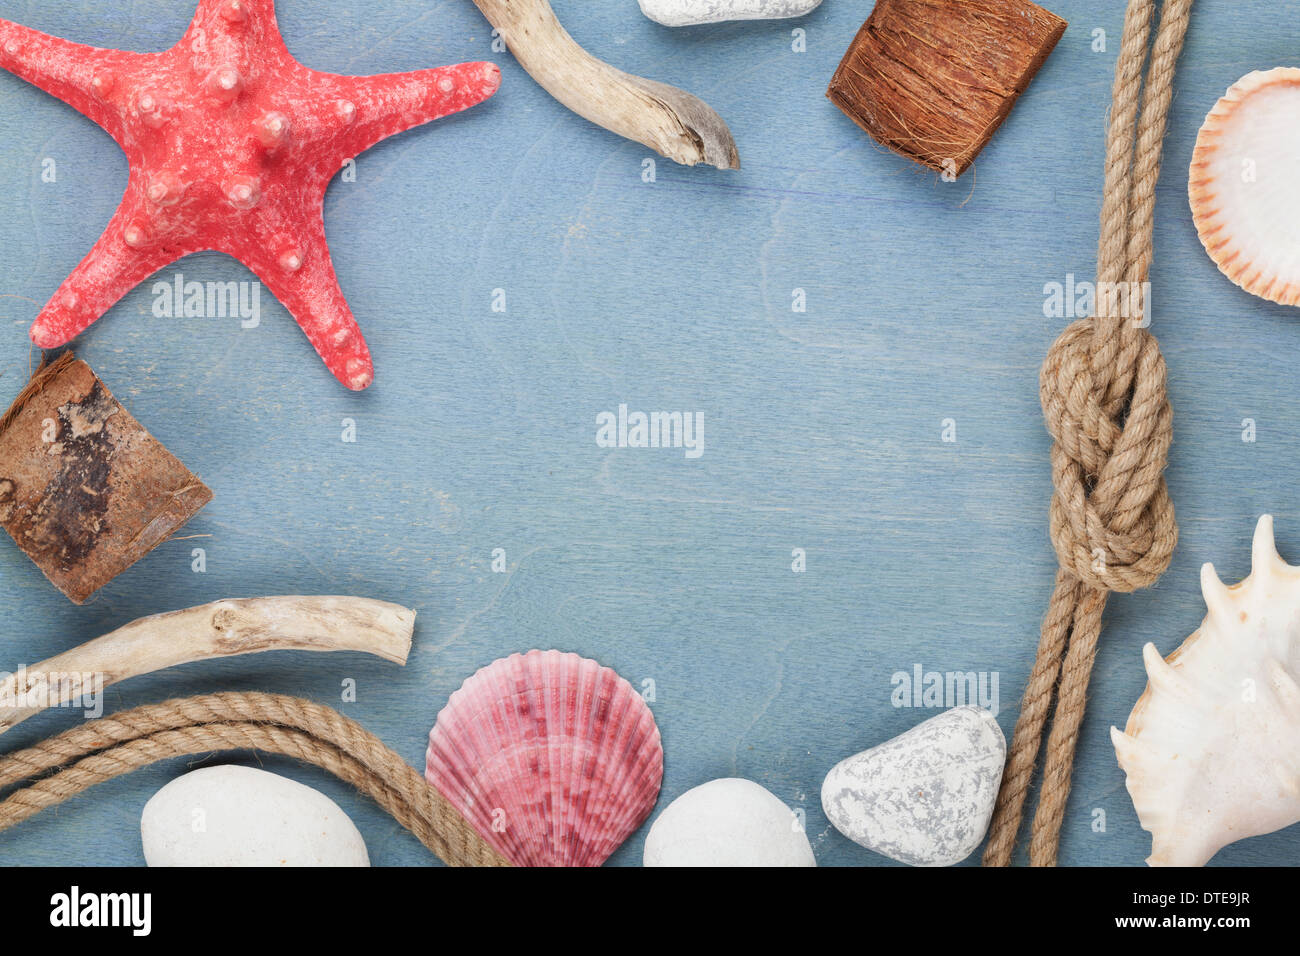 Sea travel frame decor with seashells and rope over wooden background Stock Photo